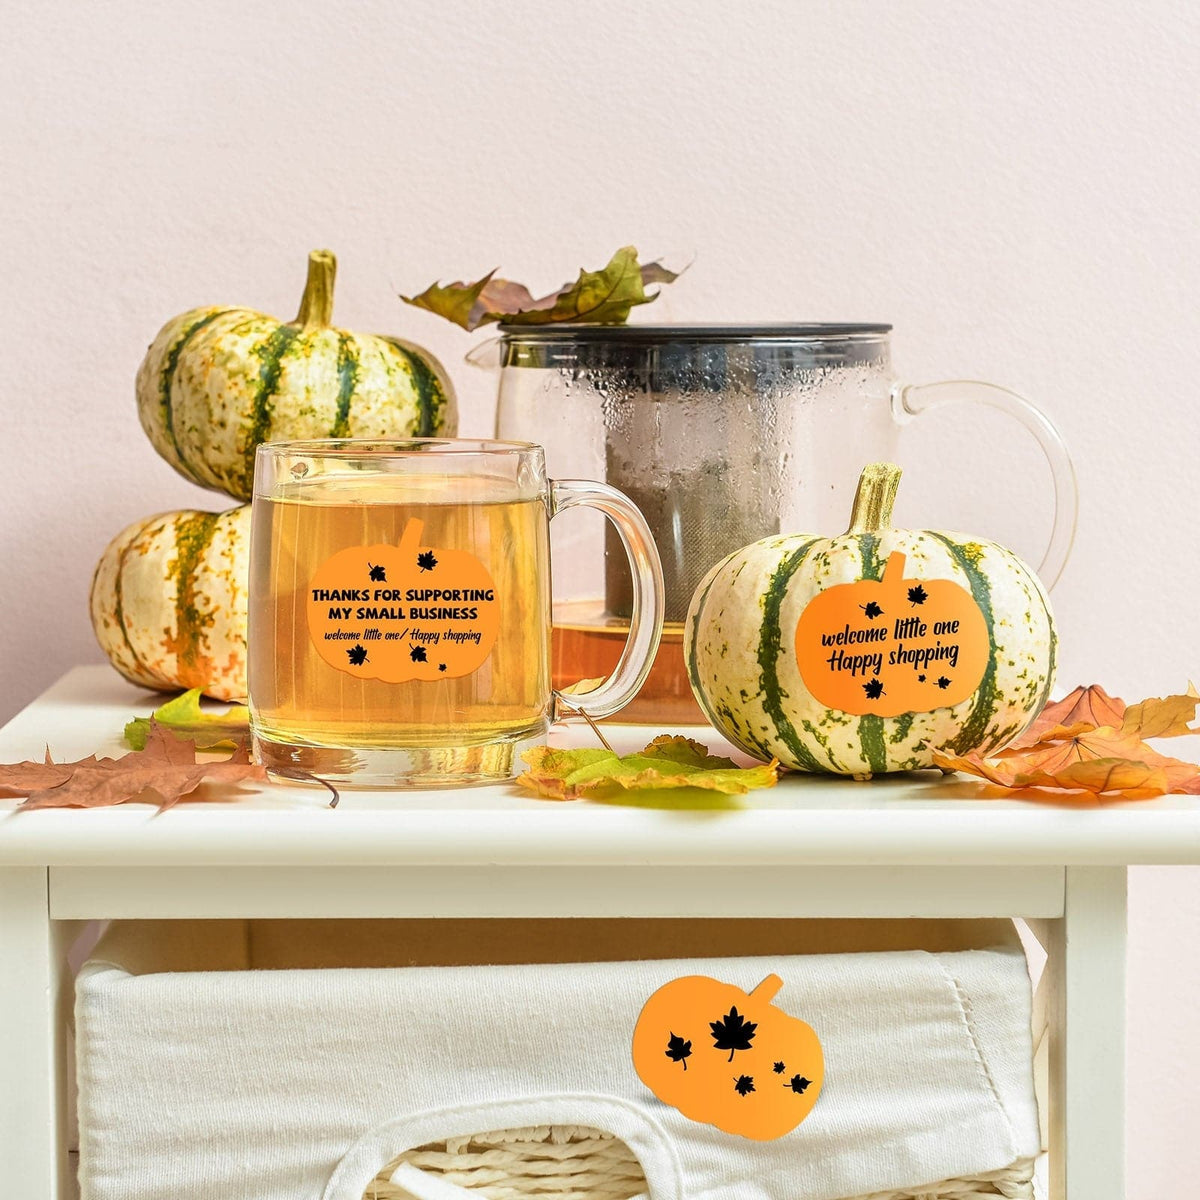 MUNBYN pumpkin-shaped thermal labels are perfect for Halloween crafts, decorations, personalized gifts, or even for product labelling at Halloween sales.